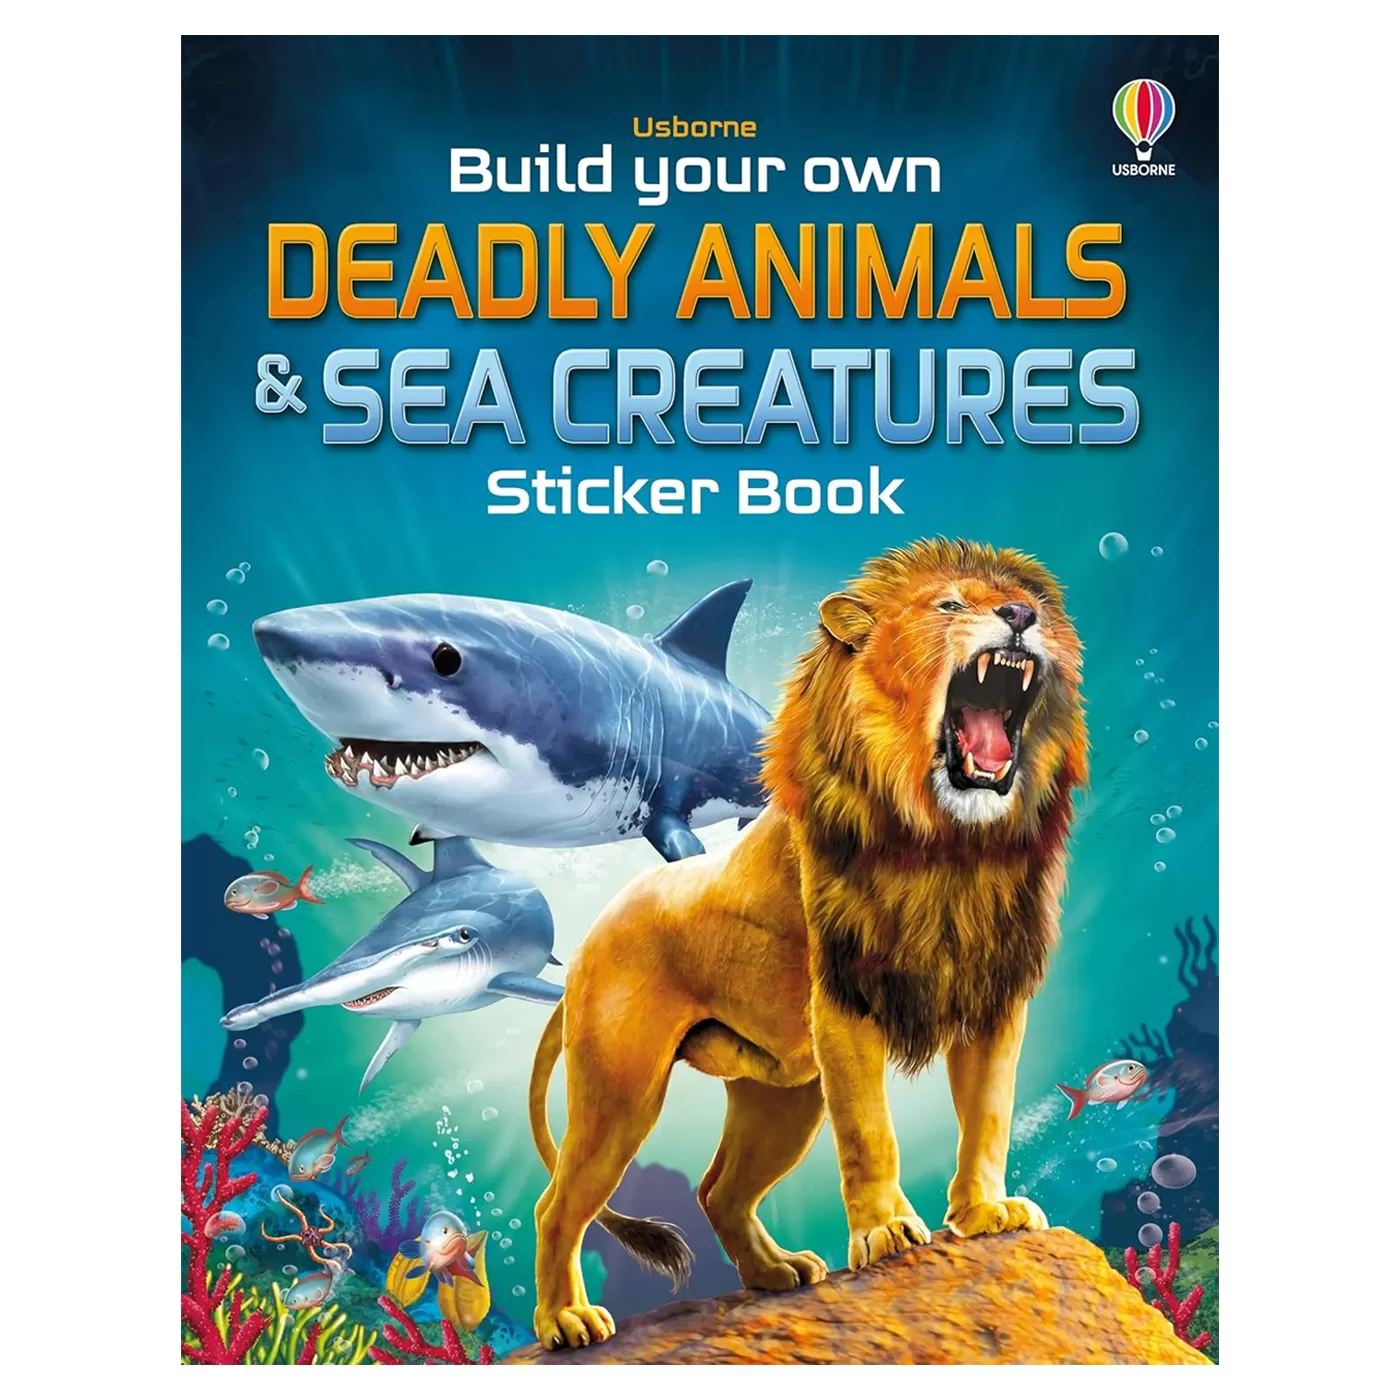 USBORNE Build your own Deadly Animals and Sea Creatures Sticker Book